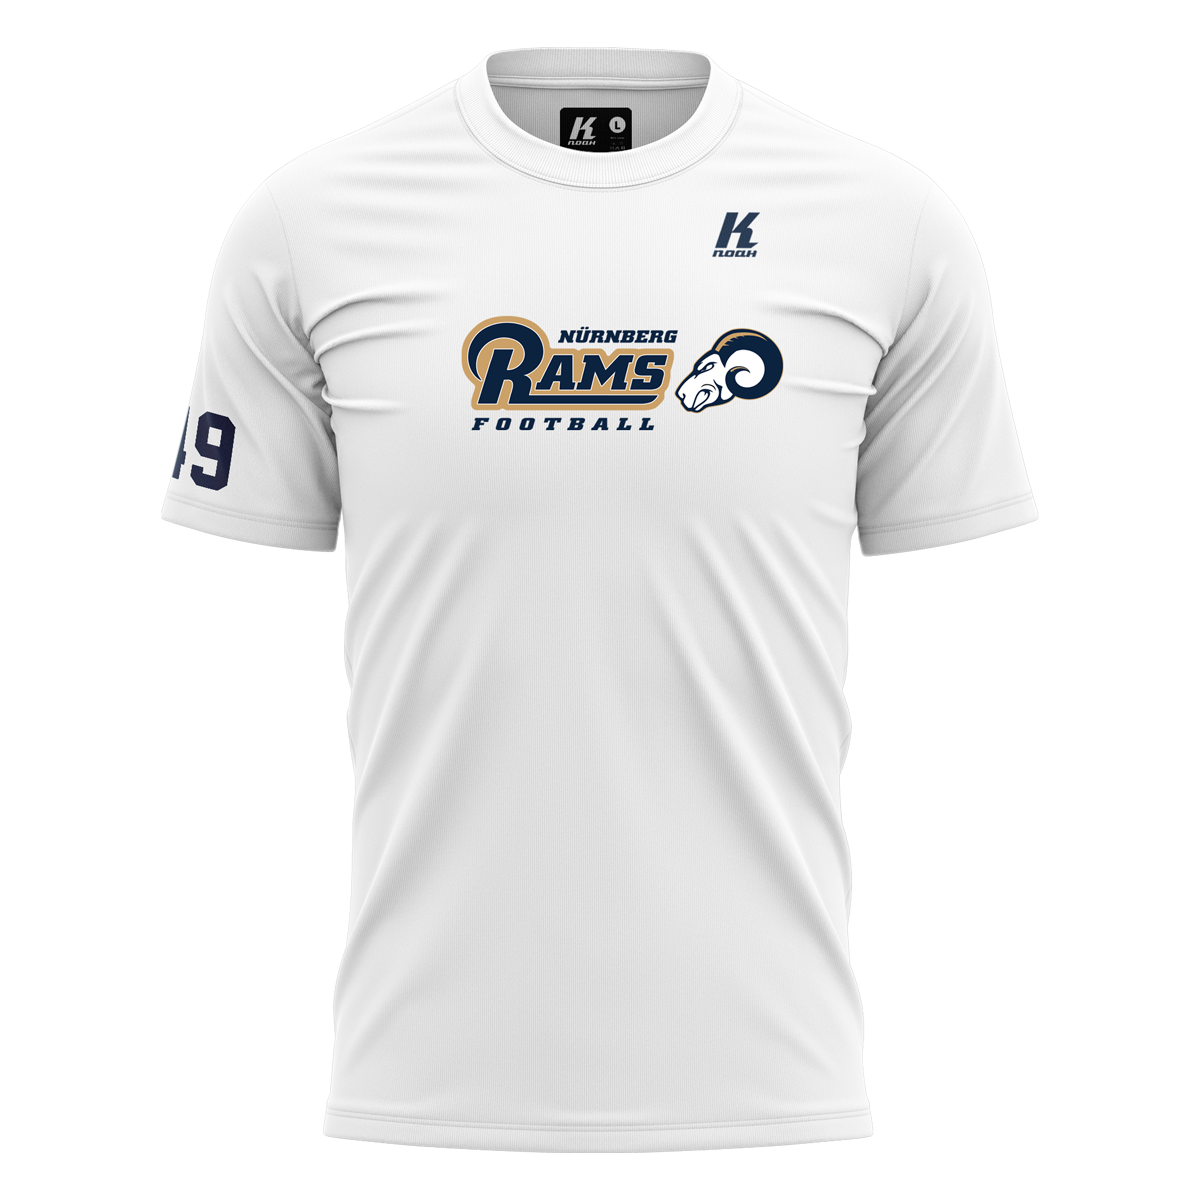 Rams Basic Tee Essential White with Playernumber/Initials